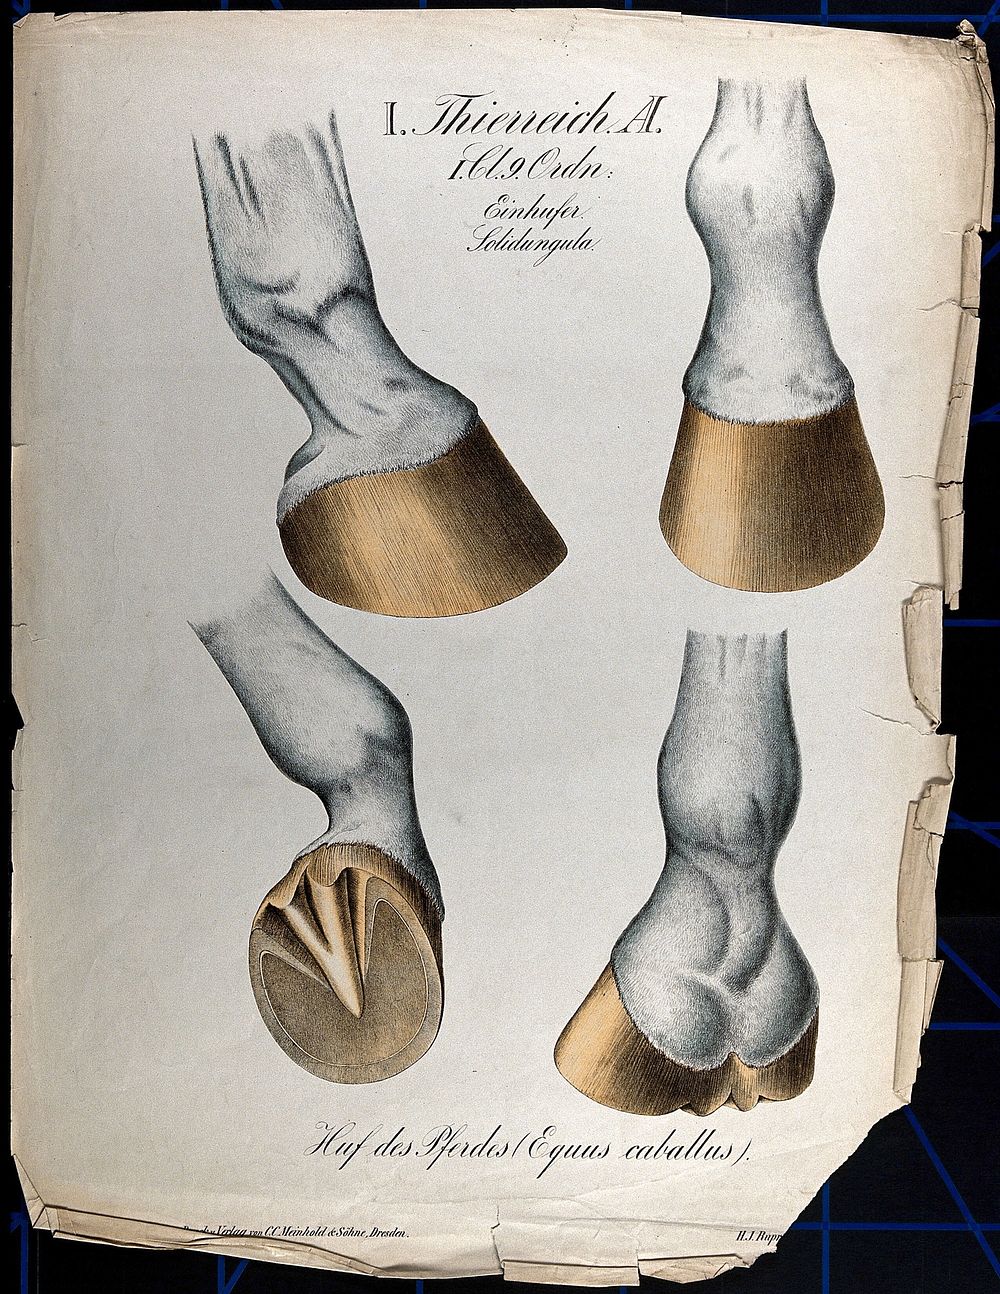 Lower parts of horses' legs, and hooves: four figures. Chromolithograph by H.J. Ruprecht, 1877.